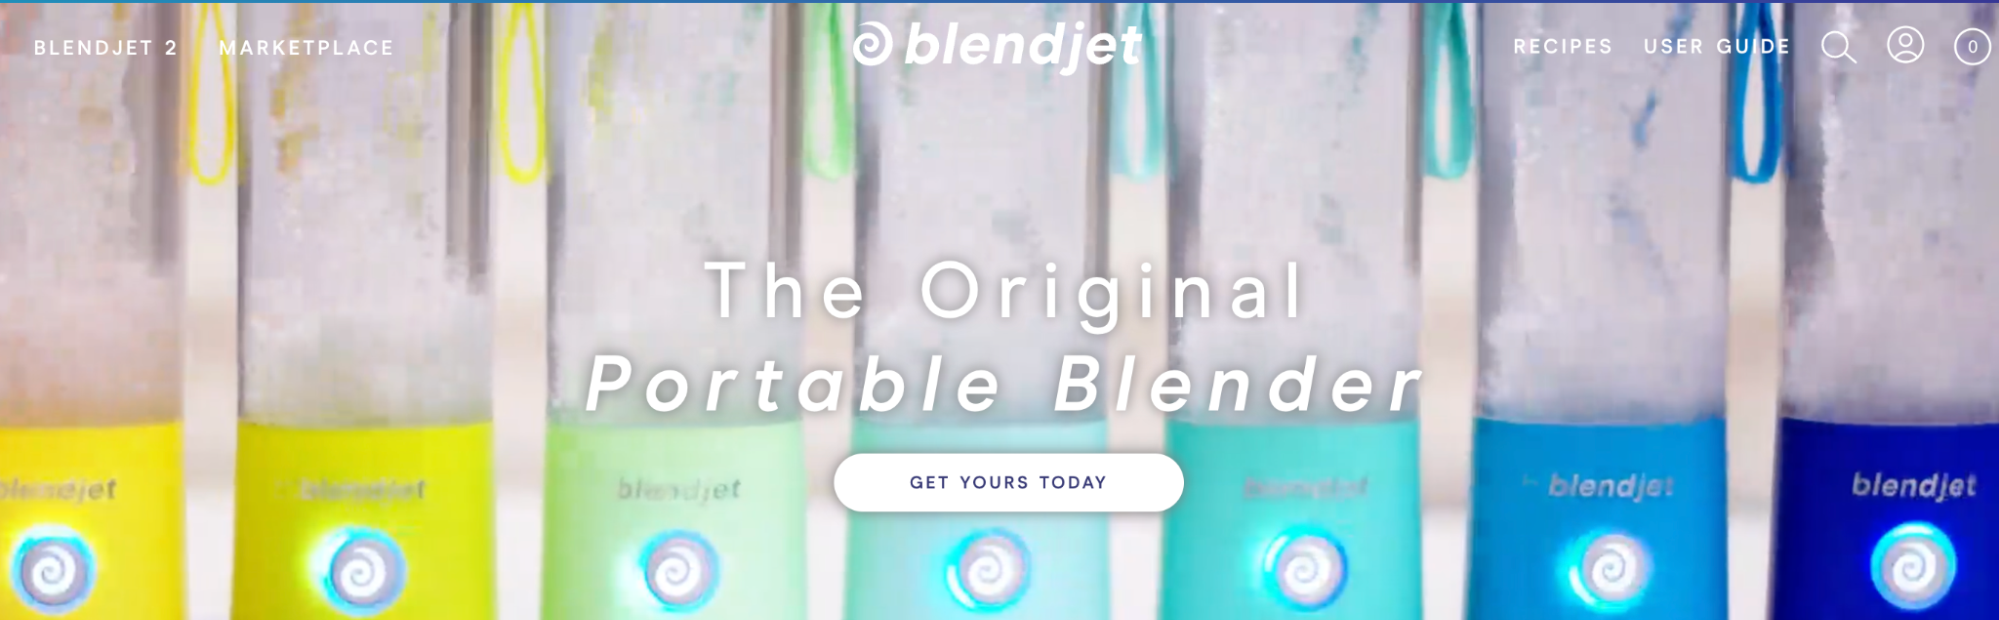 Image shows a screenshot from BlendJet's website, with a rainbow line of blenders.